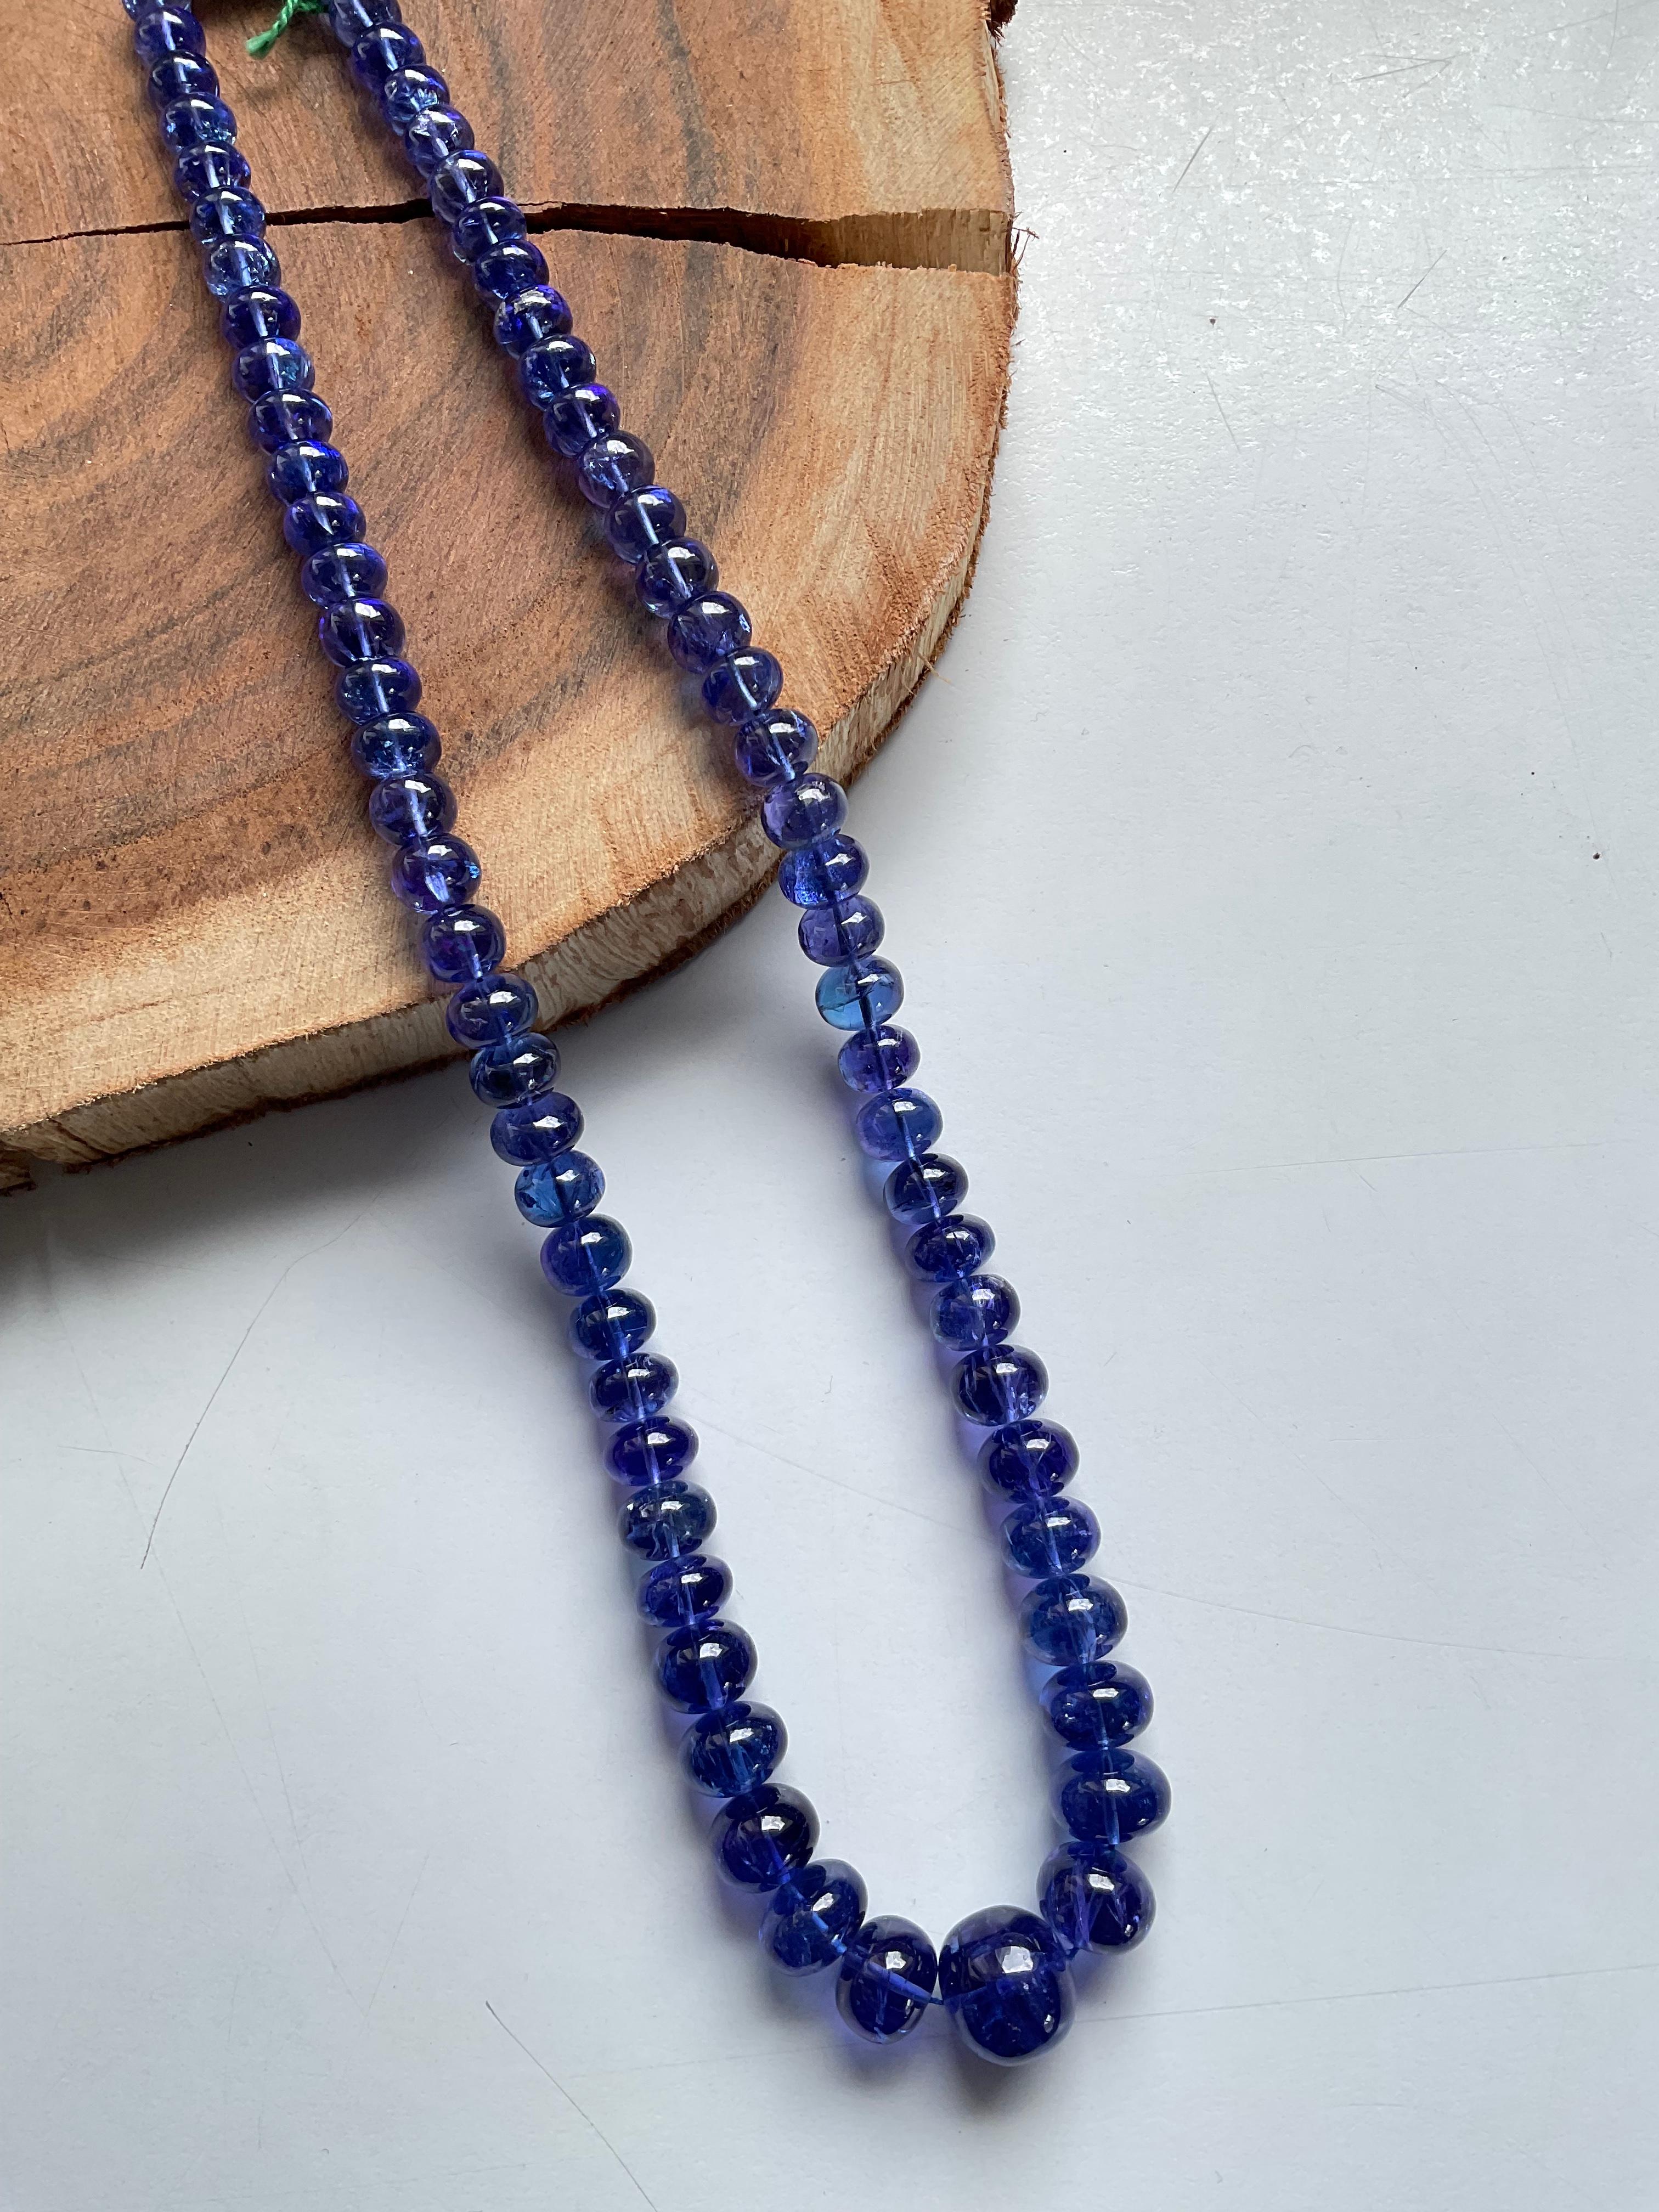 Tanzanite Top Quality Smooth Beads Natural Gemstone Necklace
Weight - 418.4 Ct
Size - 7.5 To 14 MM
Quantity - 1 Strand

Tanzanite Beaded Necklace